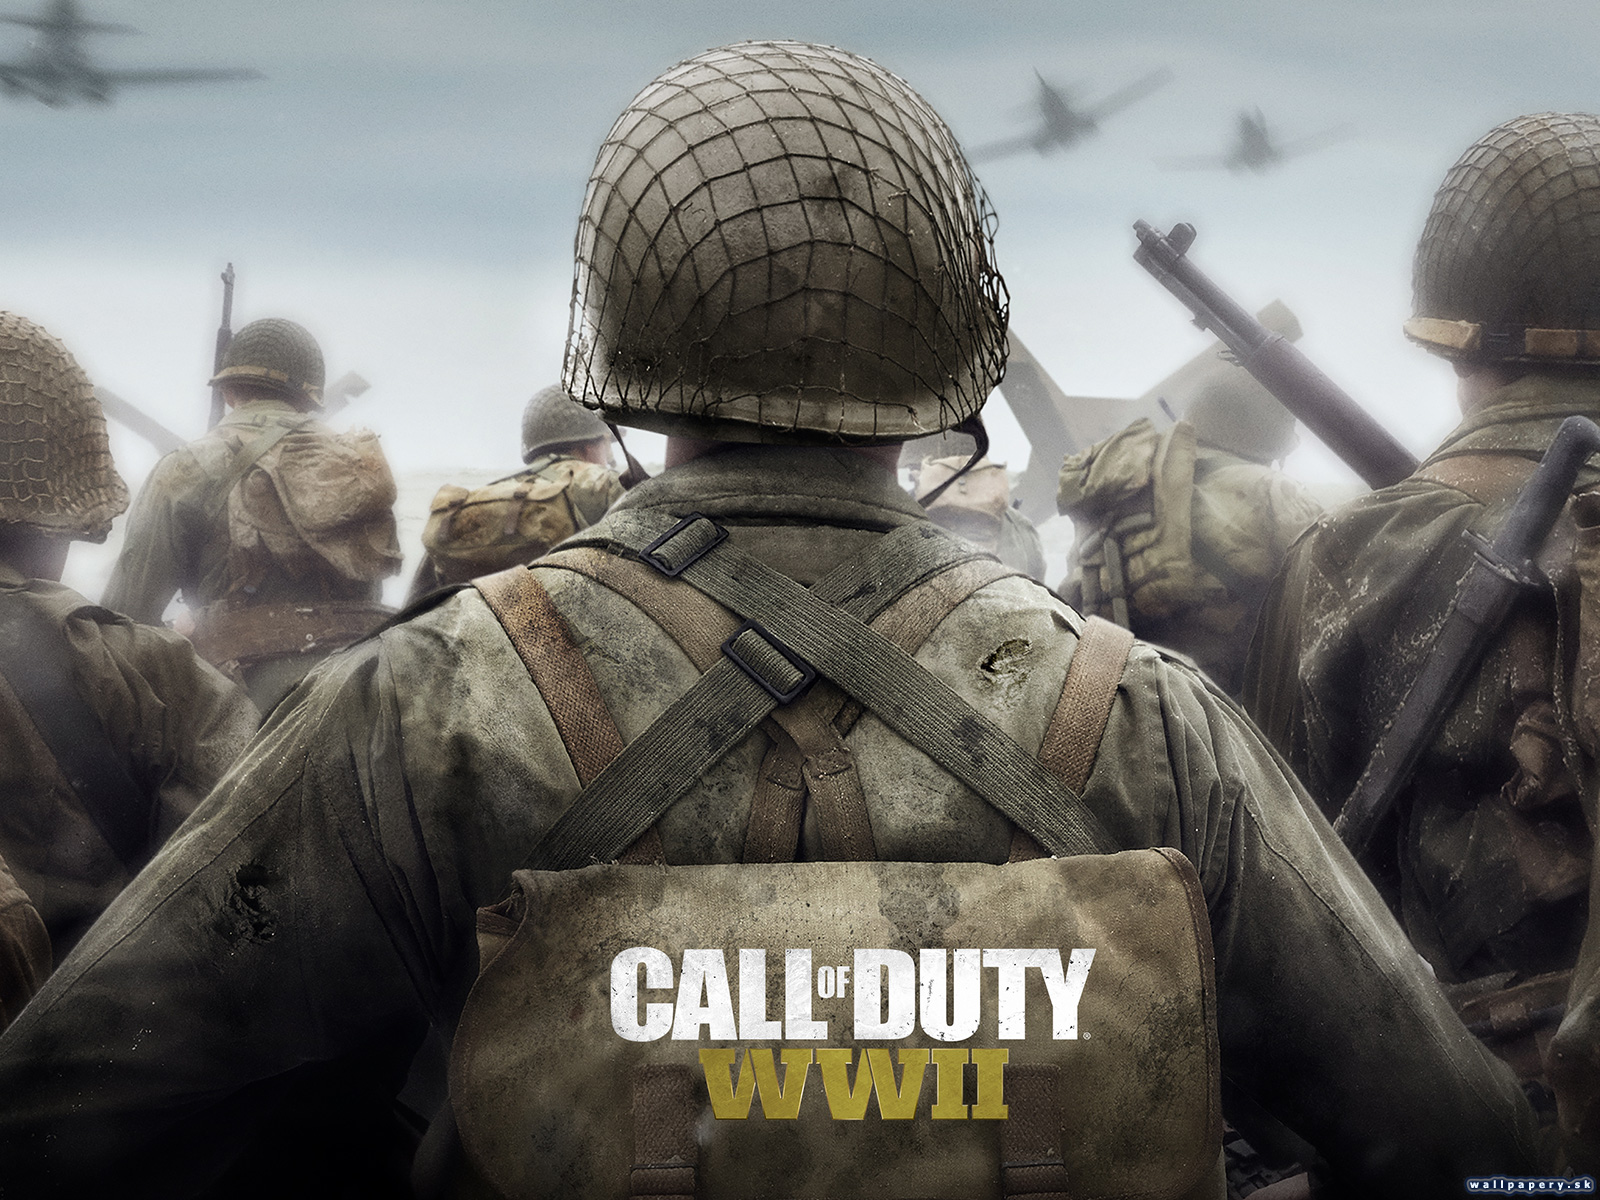 Call of Duty: WWII - wallpaper 3